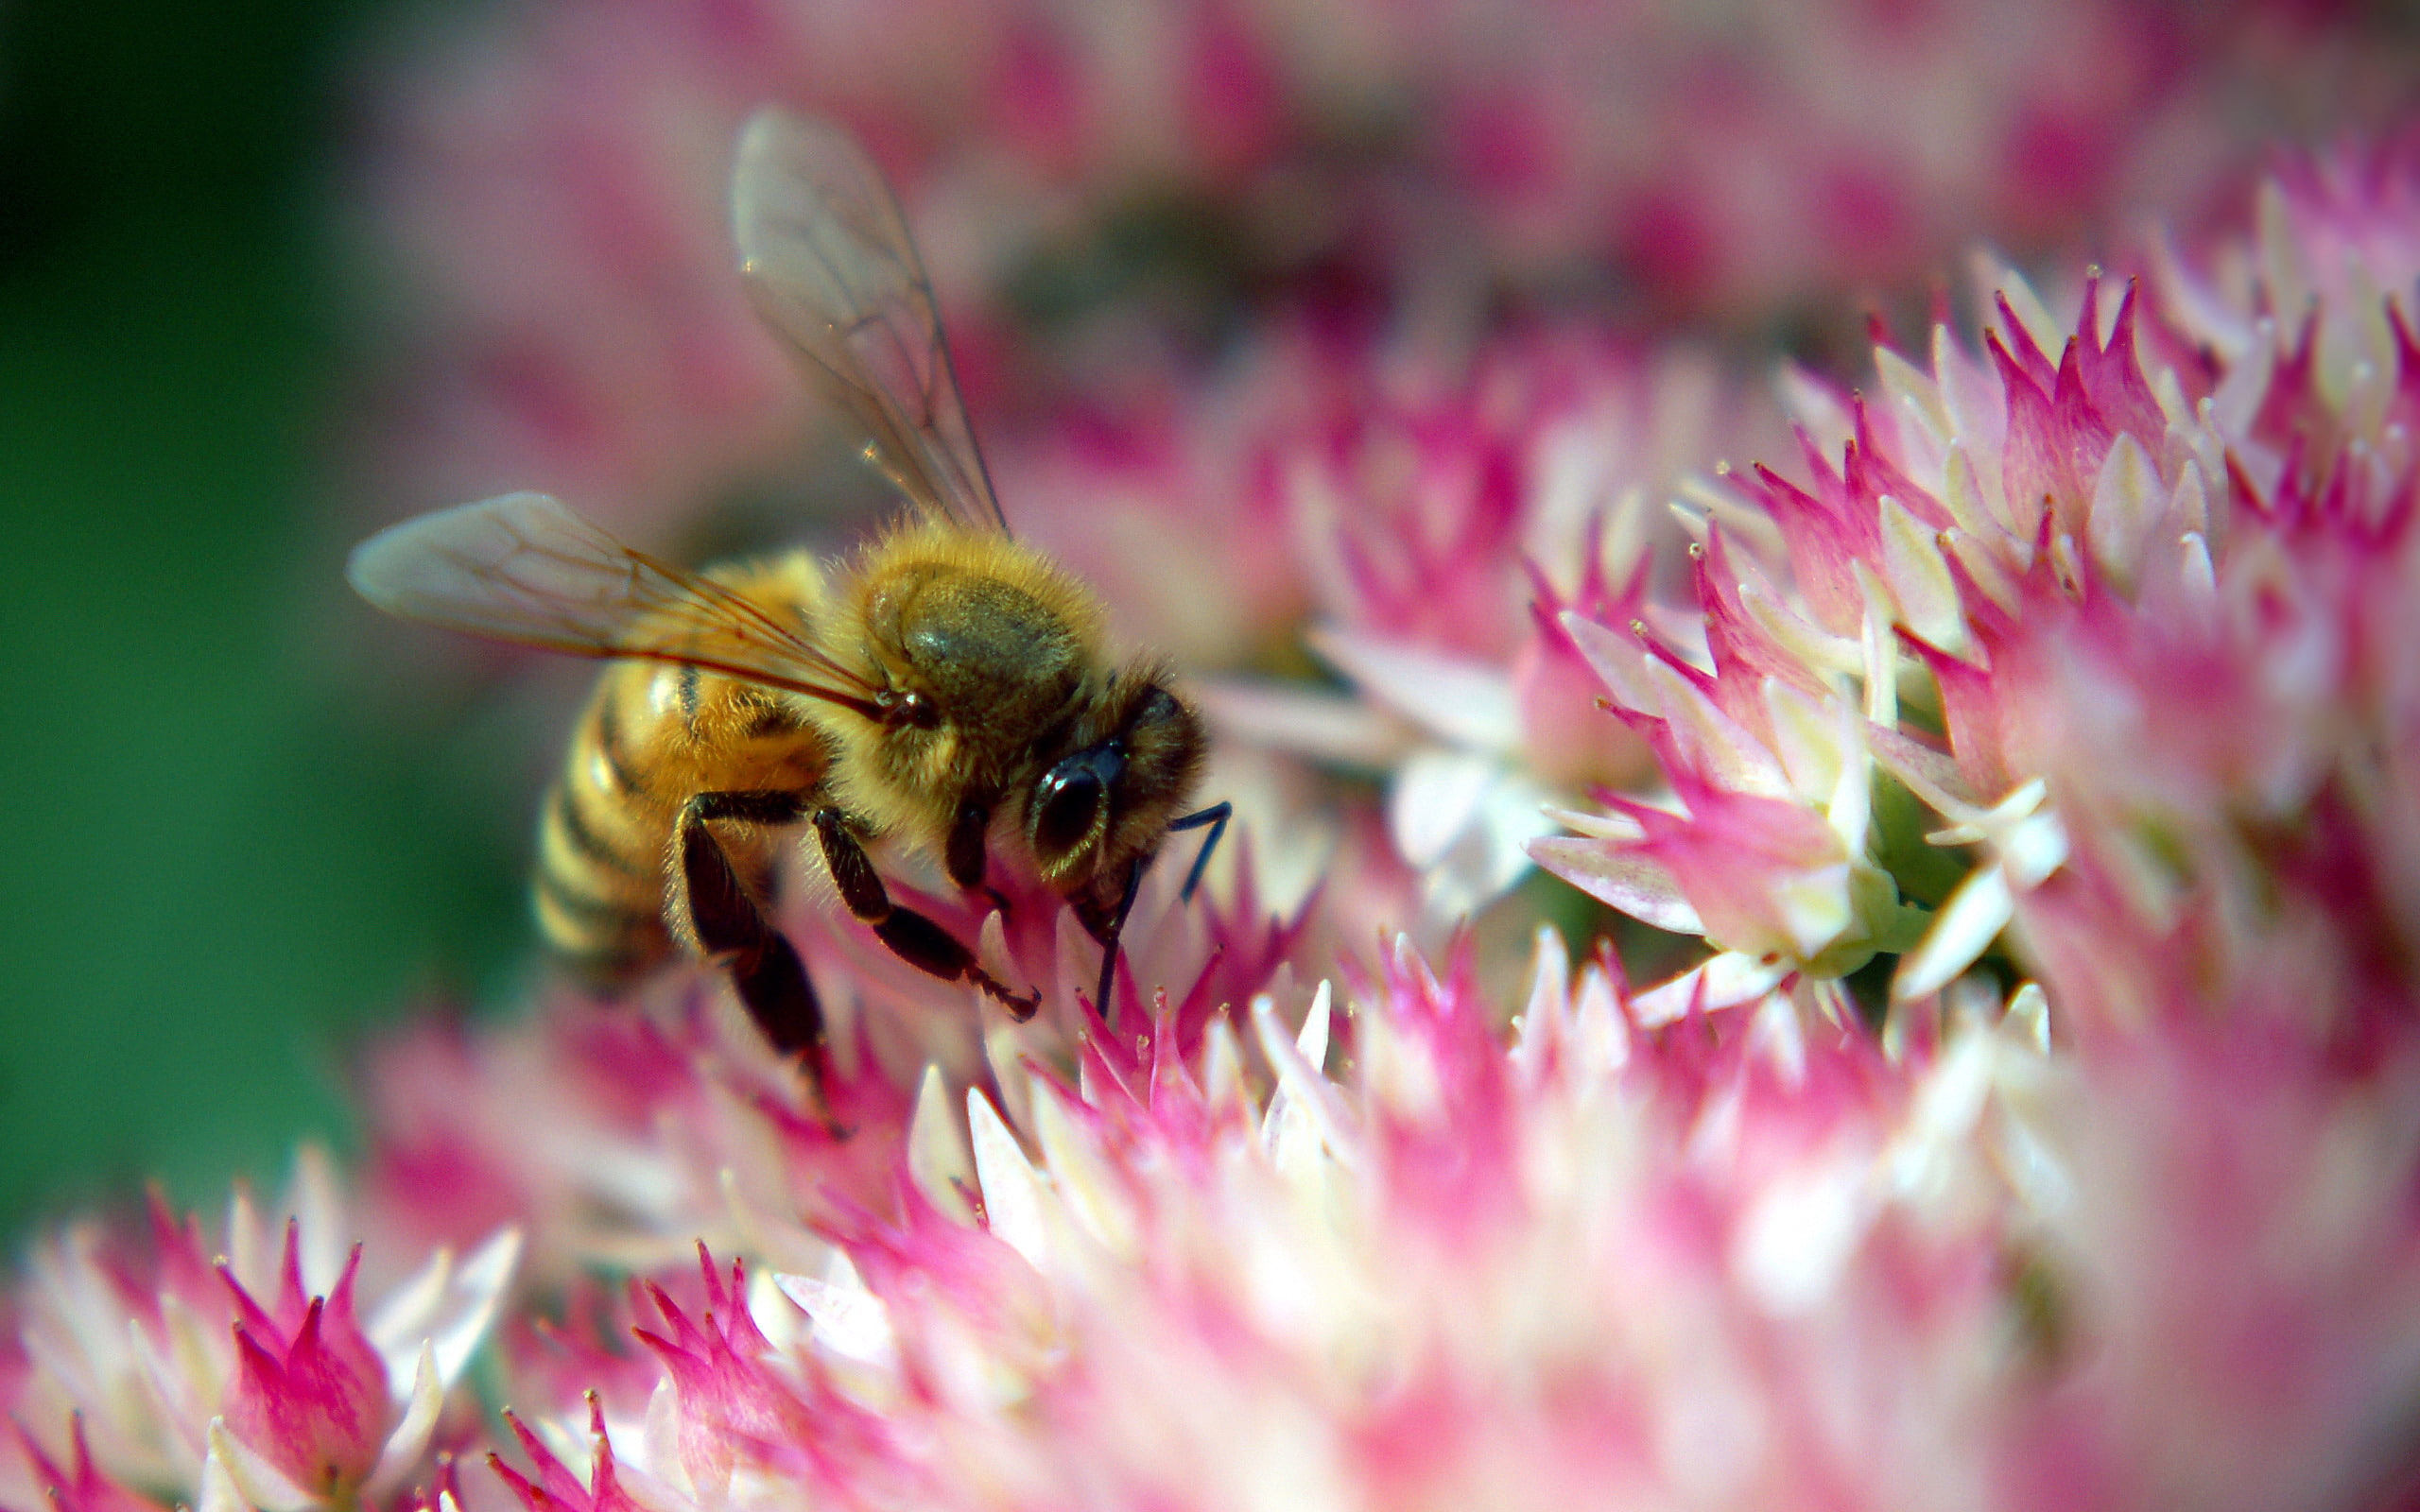 Diligent Bee, Animals, Insects, flower, pink, bees